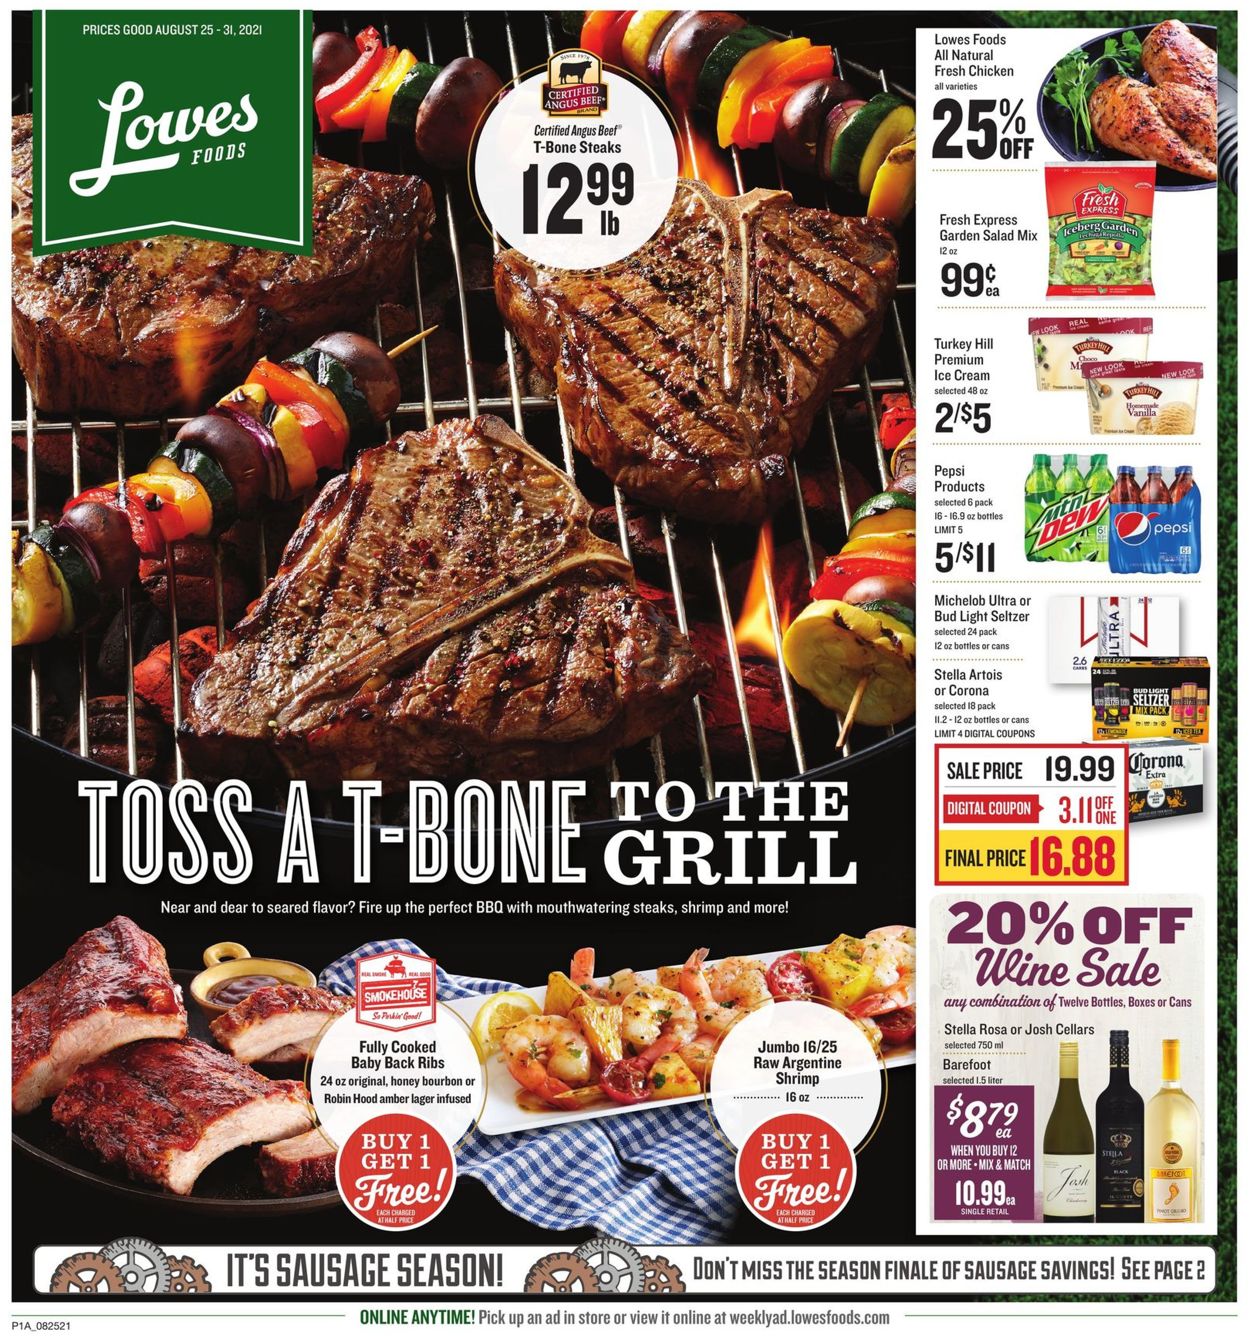 Lowes Foods Weekly Ads 